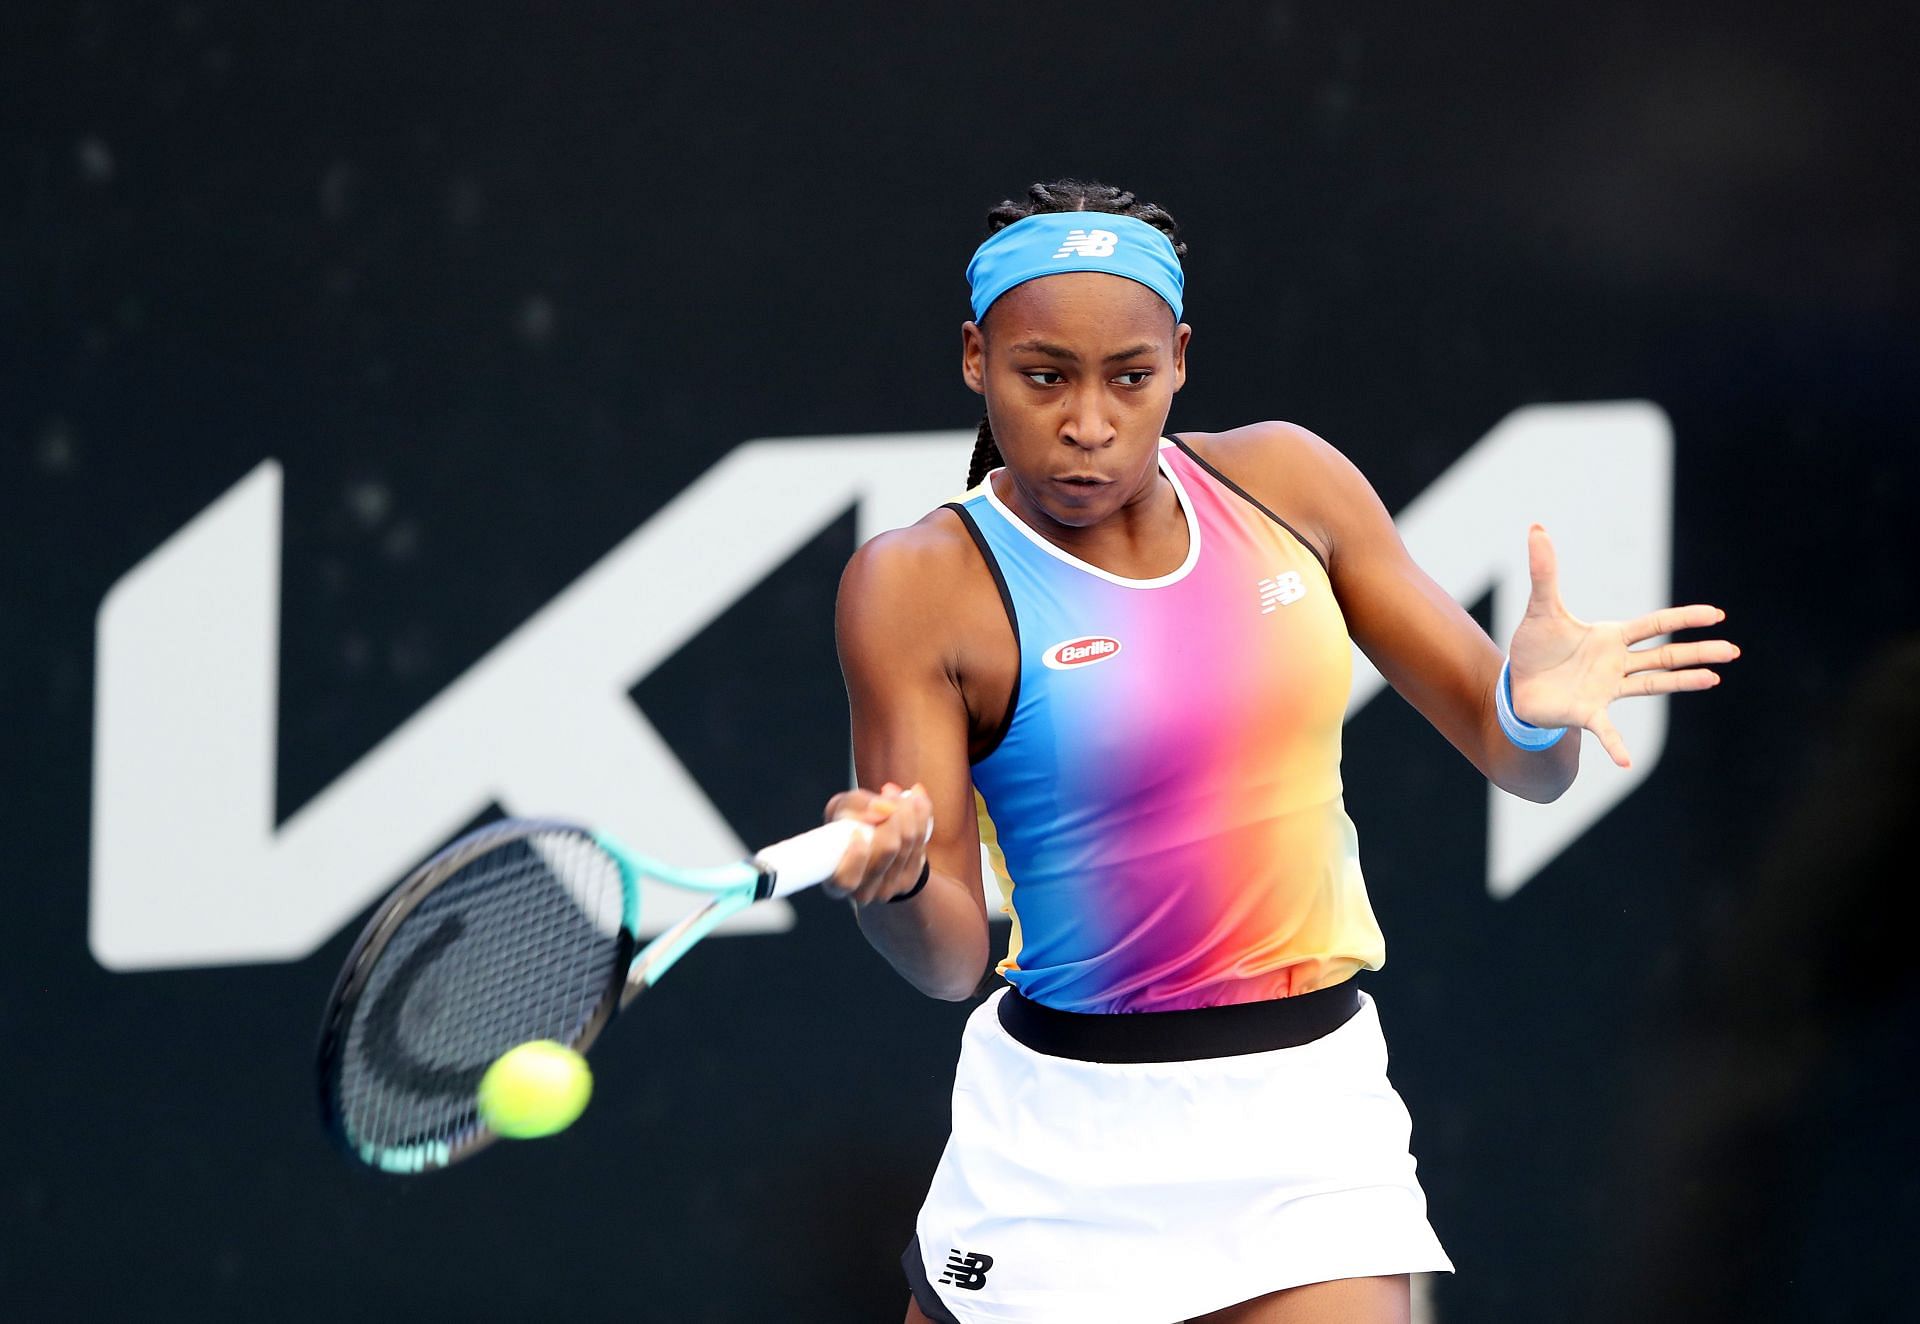 Coco Gauff at the 2022 Adelaide International.